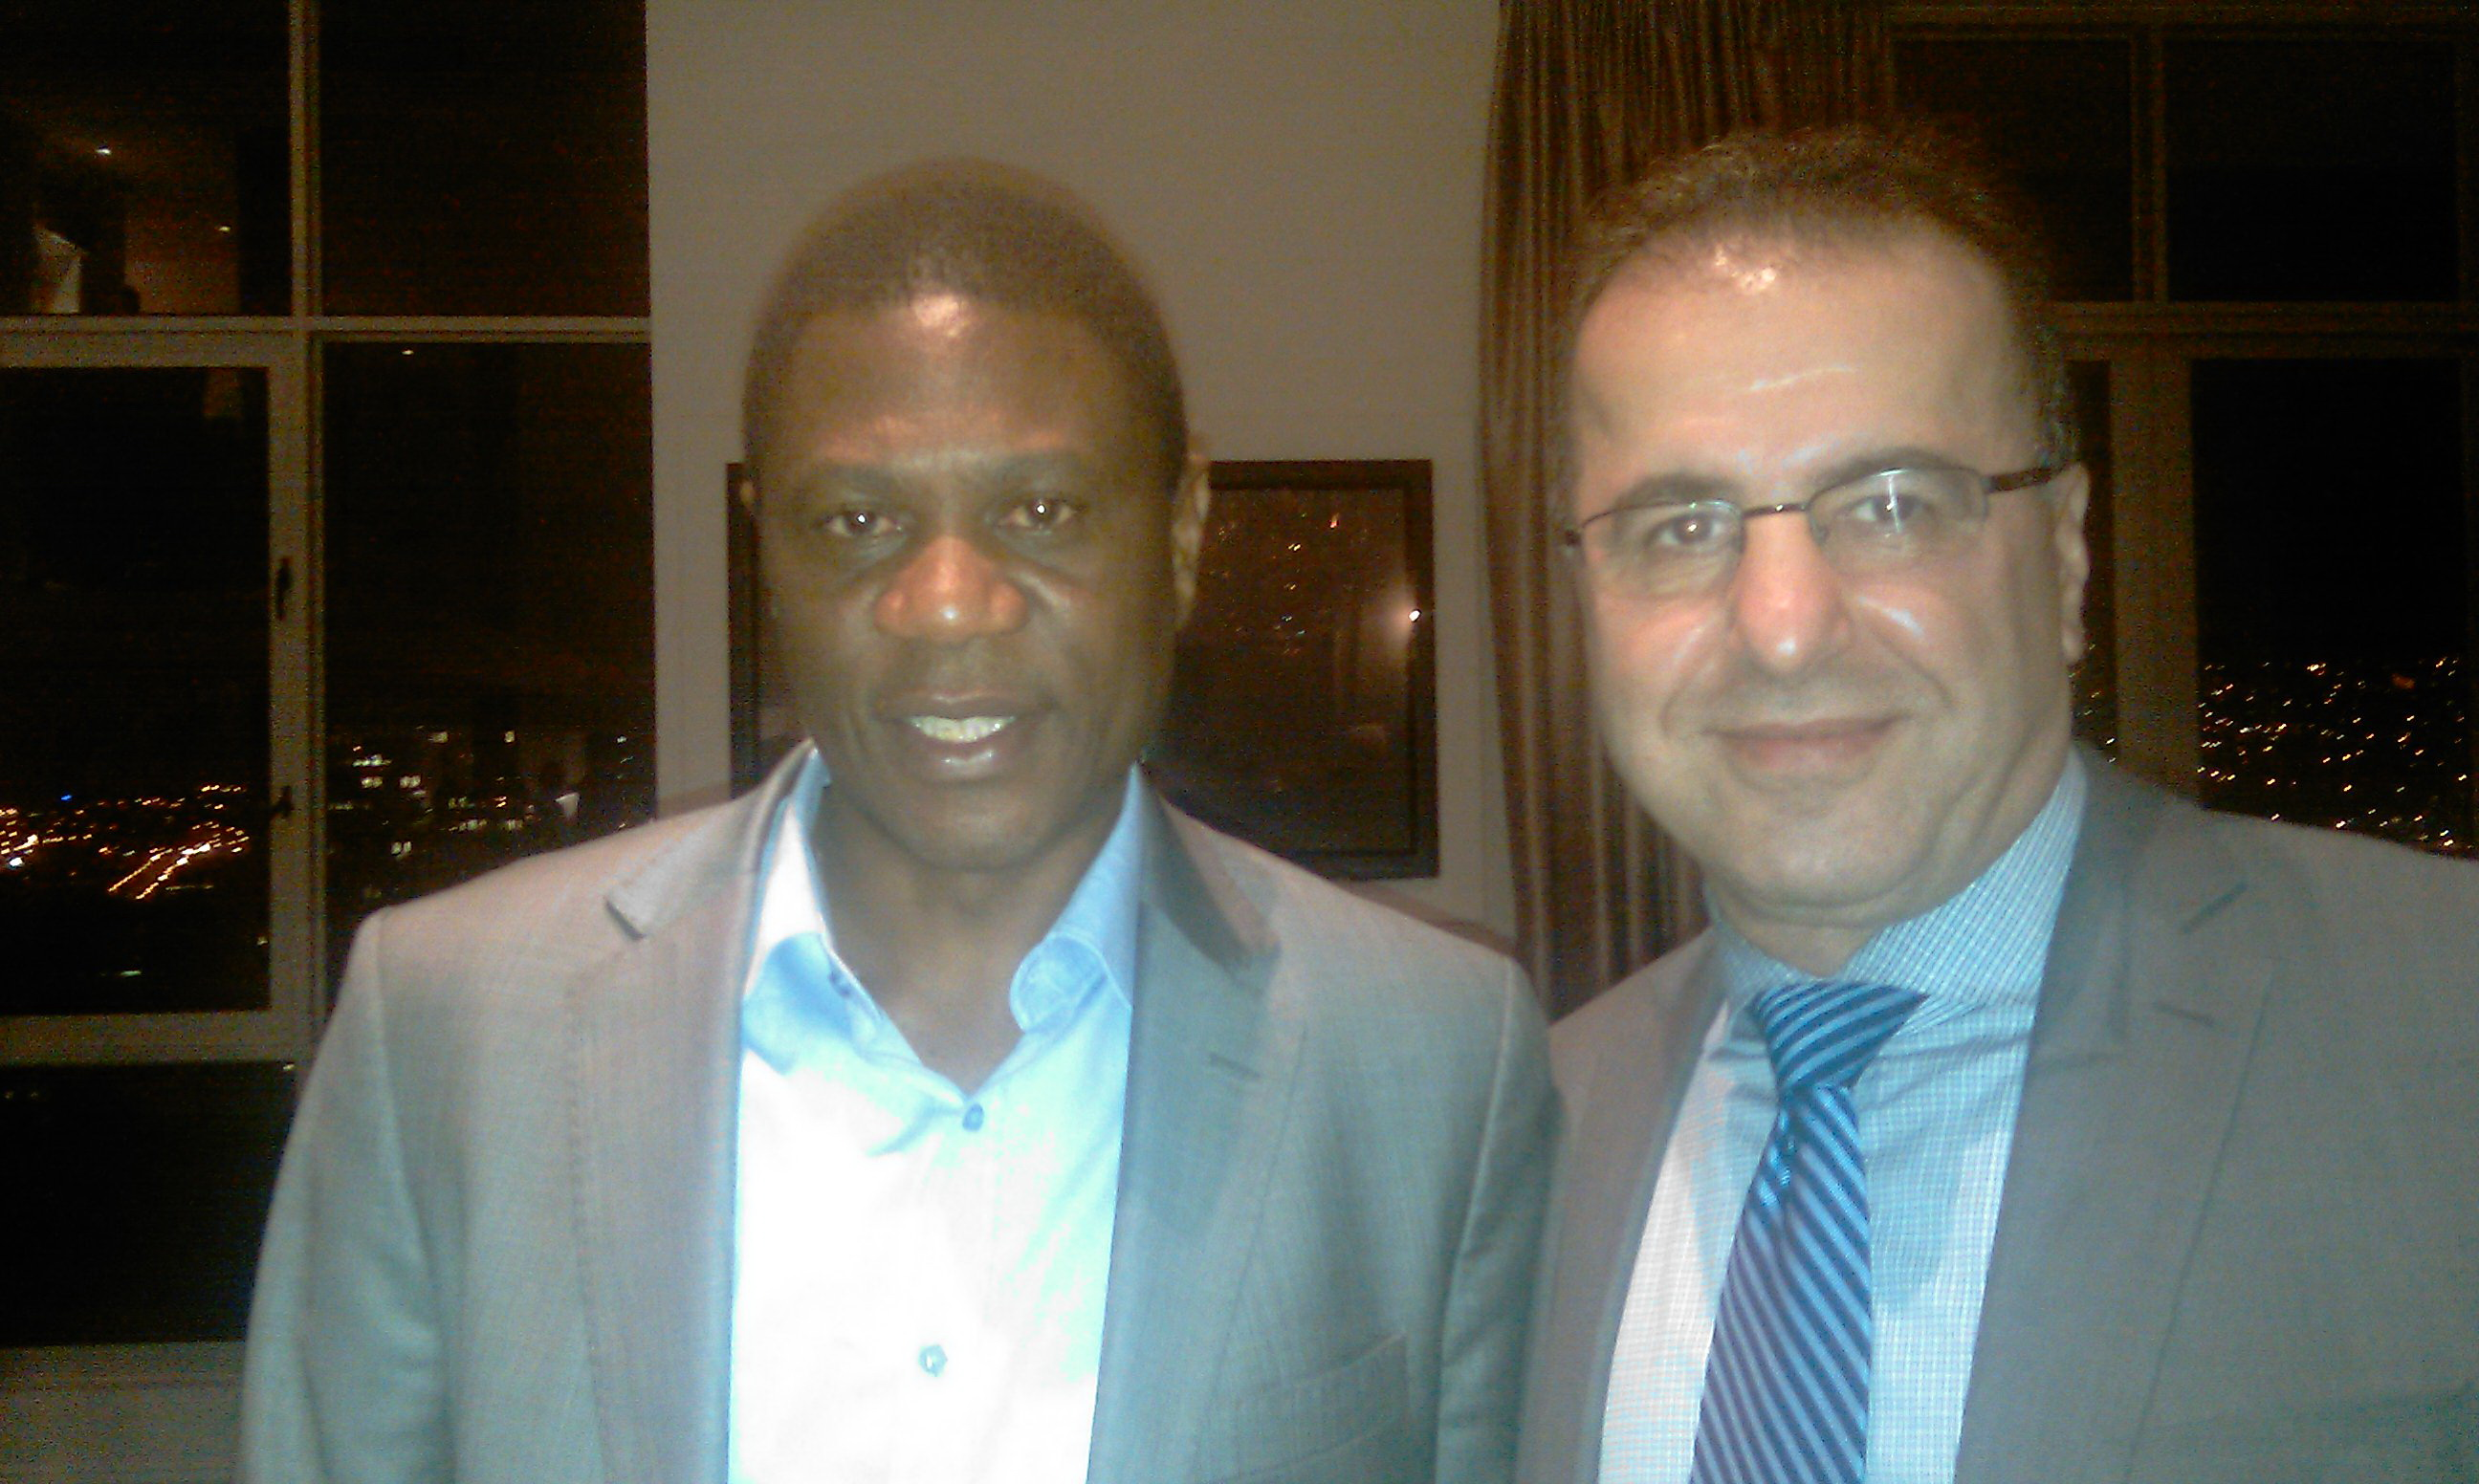 Minister of Culture Paul Mashatile in South Africa